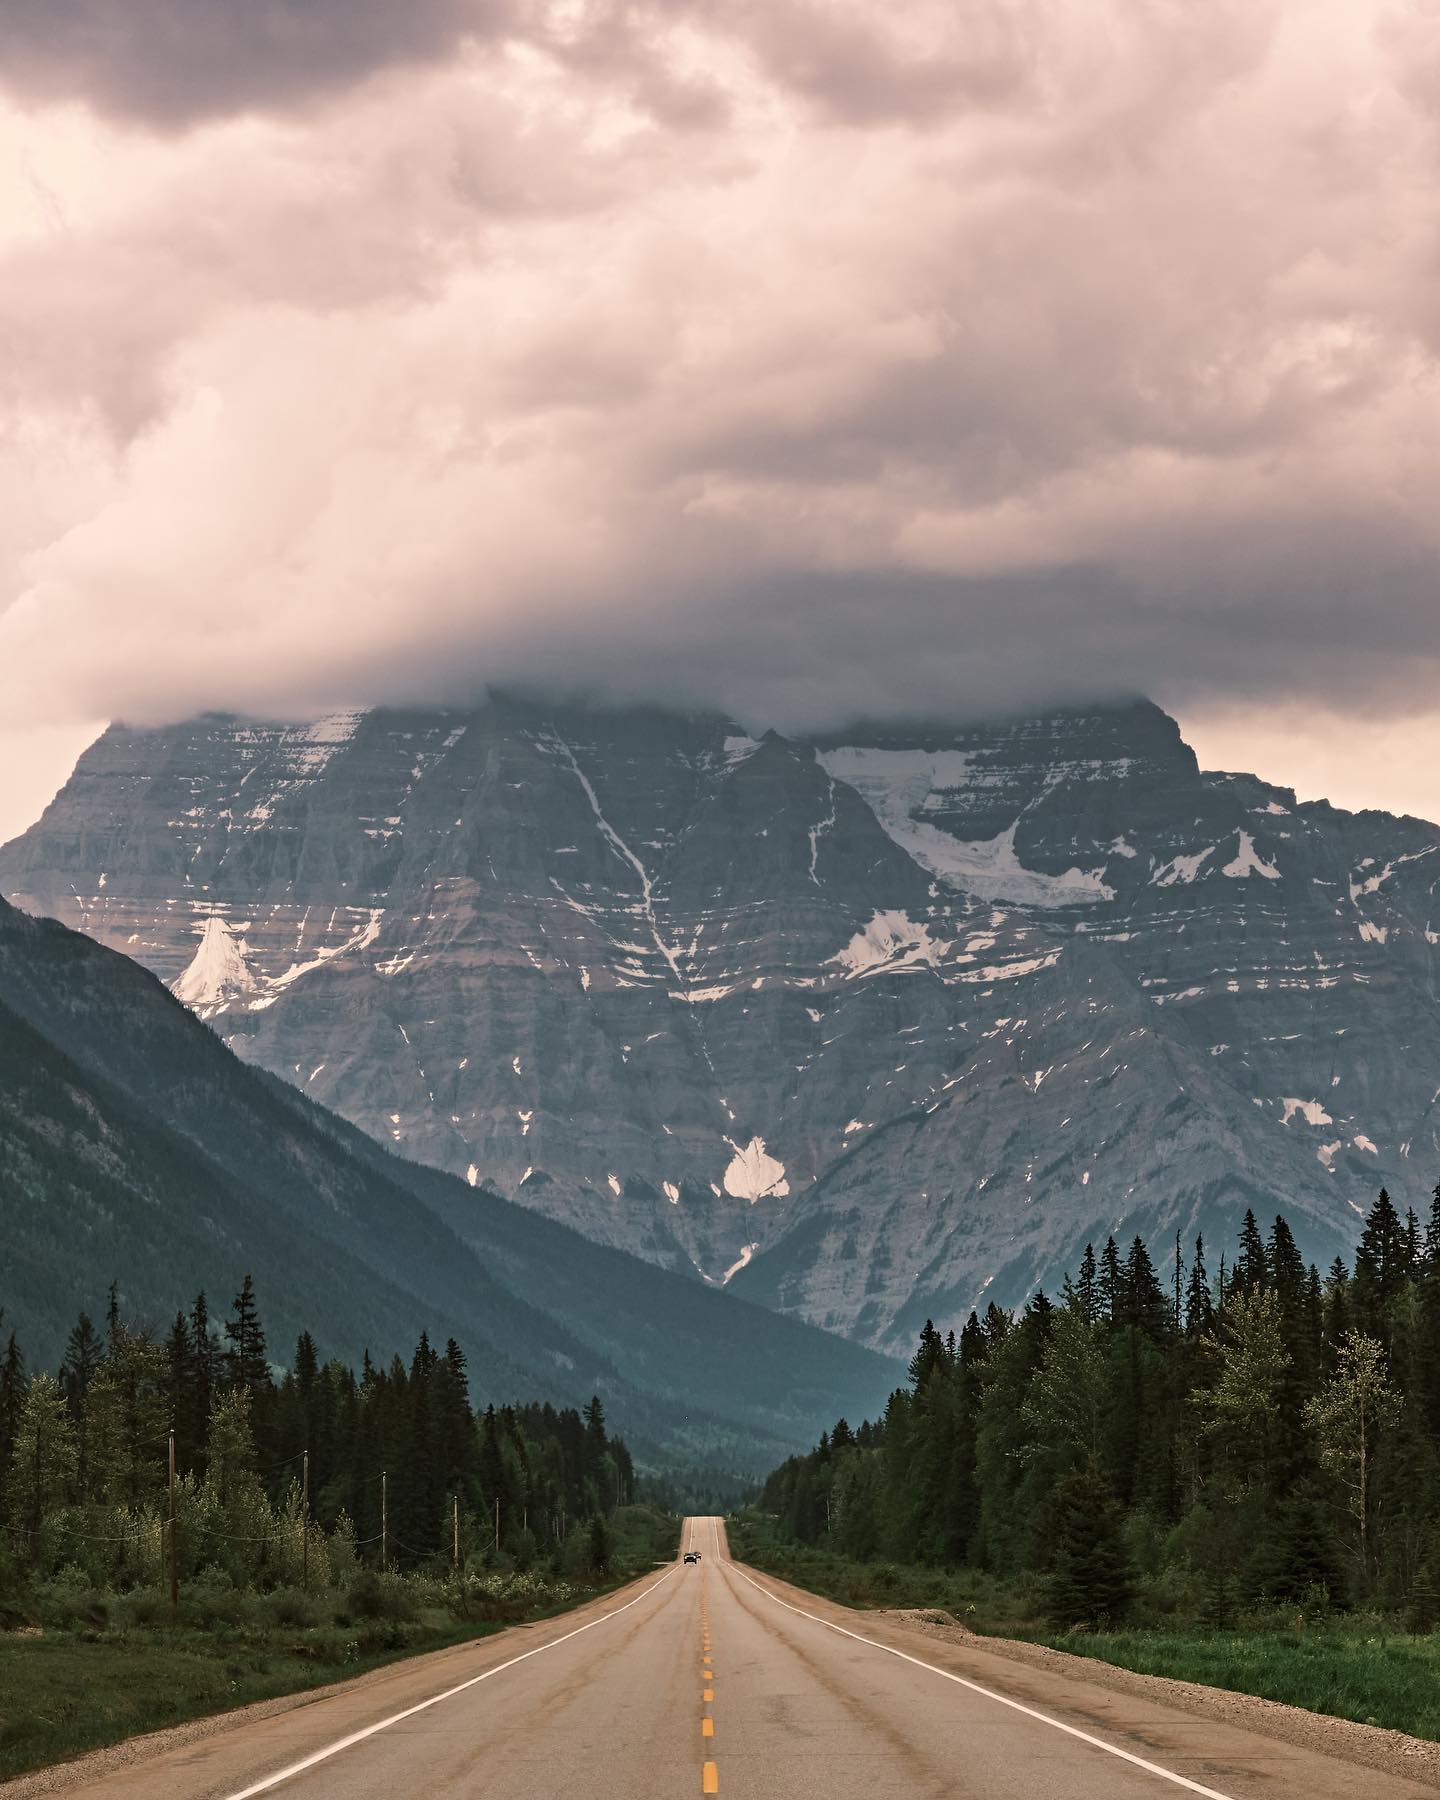 photo by pics_by_reece caption reads: • Canadian Pavement • 

One of the highlights of Canada’s highways is driving through the Rockies. The mountain featured in this photo is Mount Robson and being one of the most prominent mountains in the range, it is jaw dropping. 

Shot on fujifilmx_ca XT4 and fujinonlenses 18-55mm f/2.8-4.0 
• 1/220s • f/16 • ISO 800 • 
Edited with captureonepro 

#hellobc #bcparks #editwithus #explorecanada #canadatravel #canadavisuals #exploretocreate #getoutside #fujifilm_canada #albertabound #mountains #highway #cangeo #cangeotravel #highwayphotography 

hellobc yourbcparks parks fujixlovers fujifilm.focus _fujilove_ explorecanada tourcanada cangeo cangeotravel canadavisuals shotsofcanada